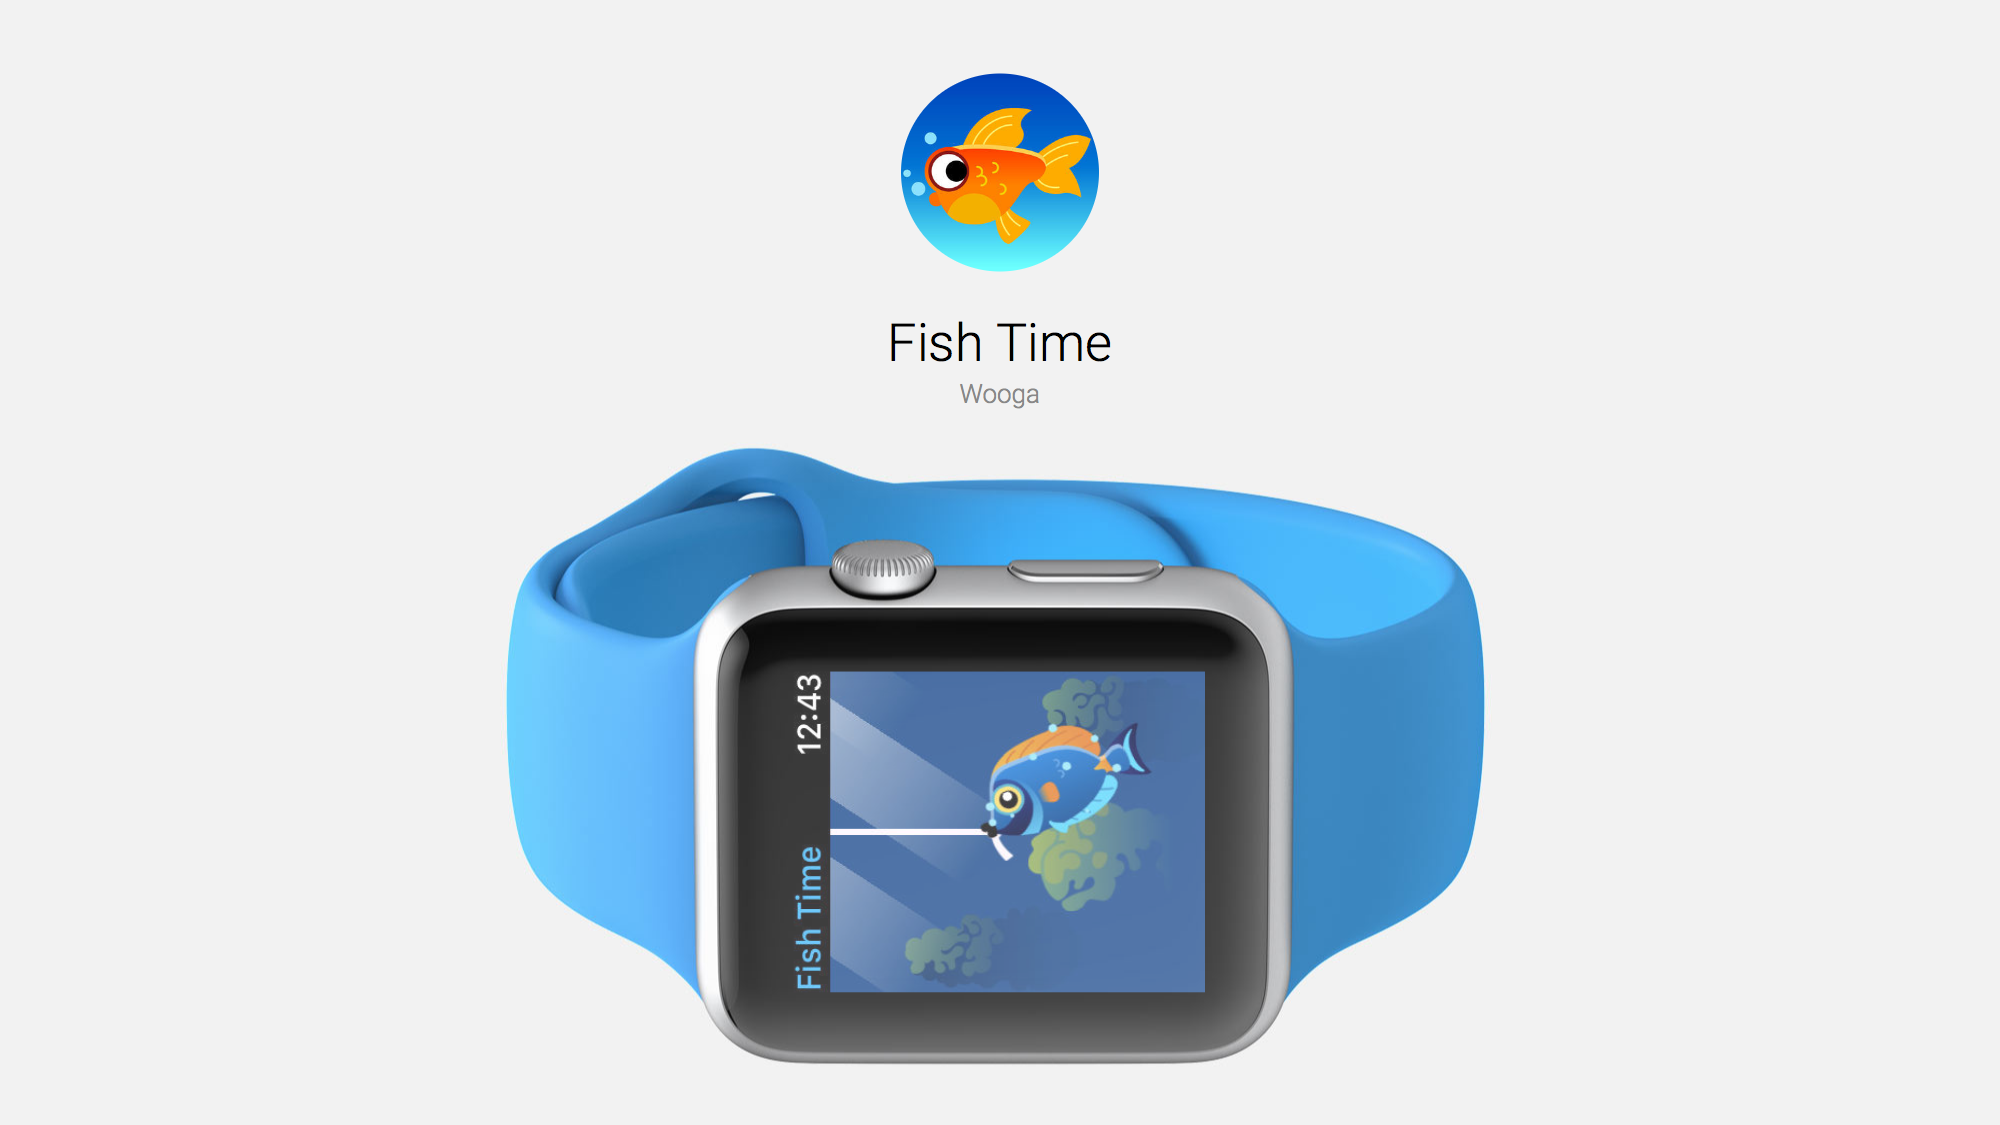 Fish Time is a Fishing Simulation Game for Apple Watch